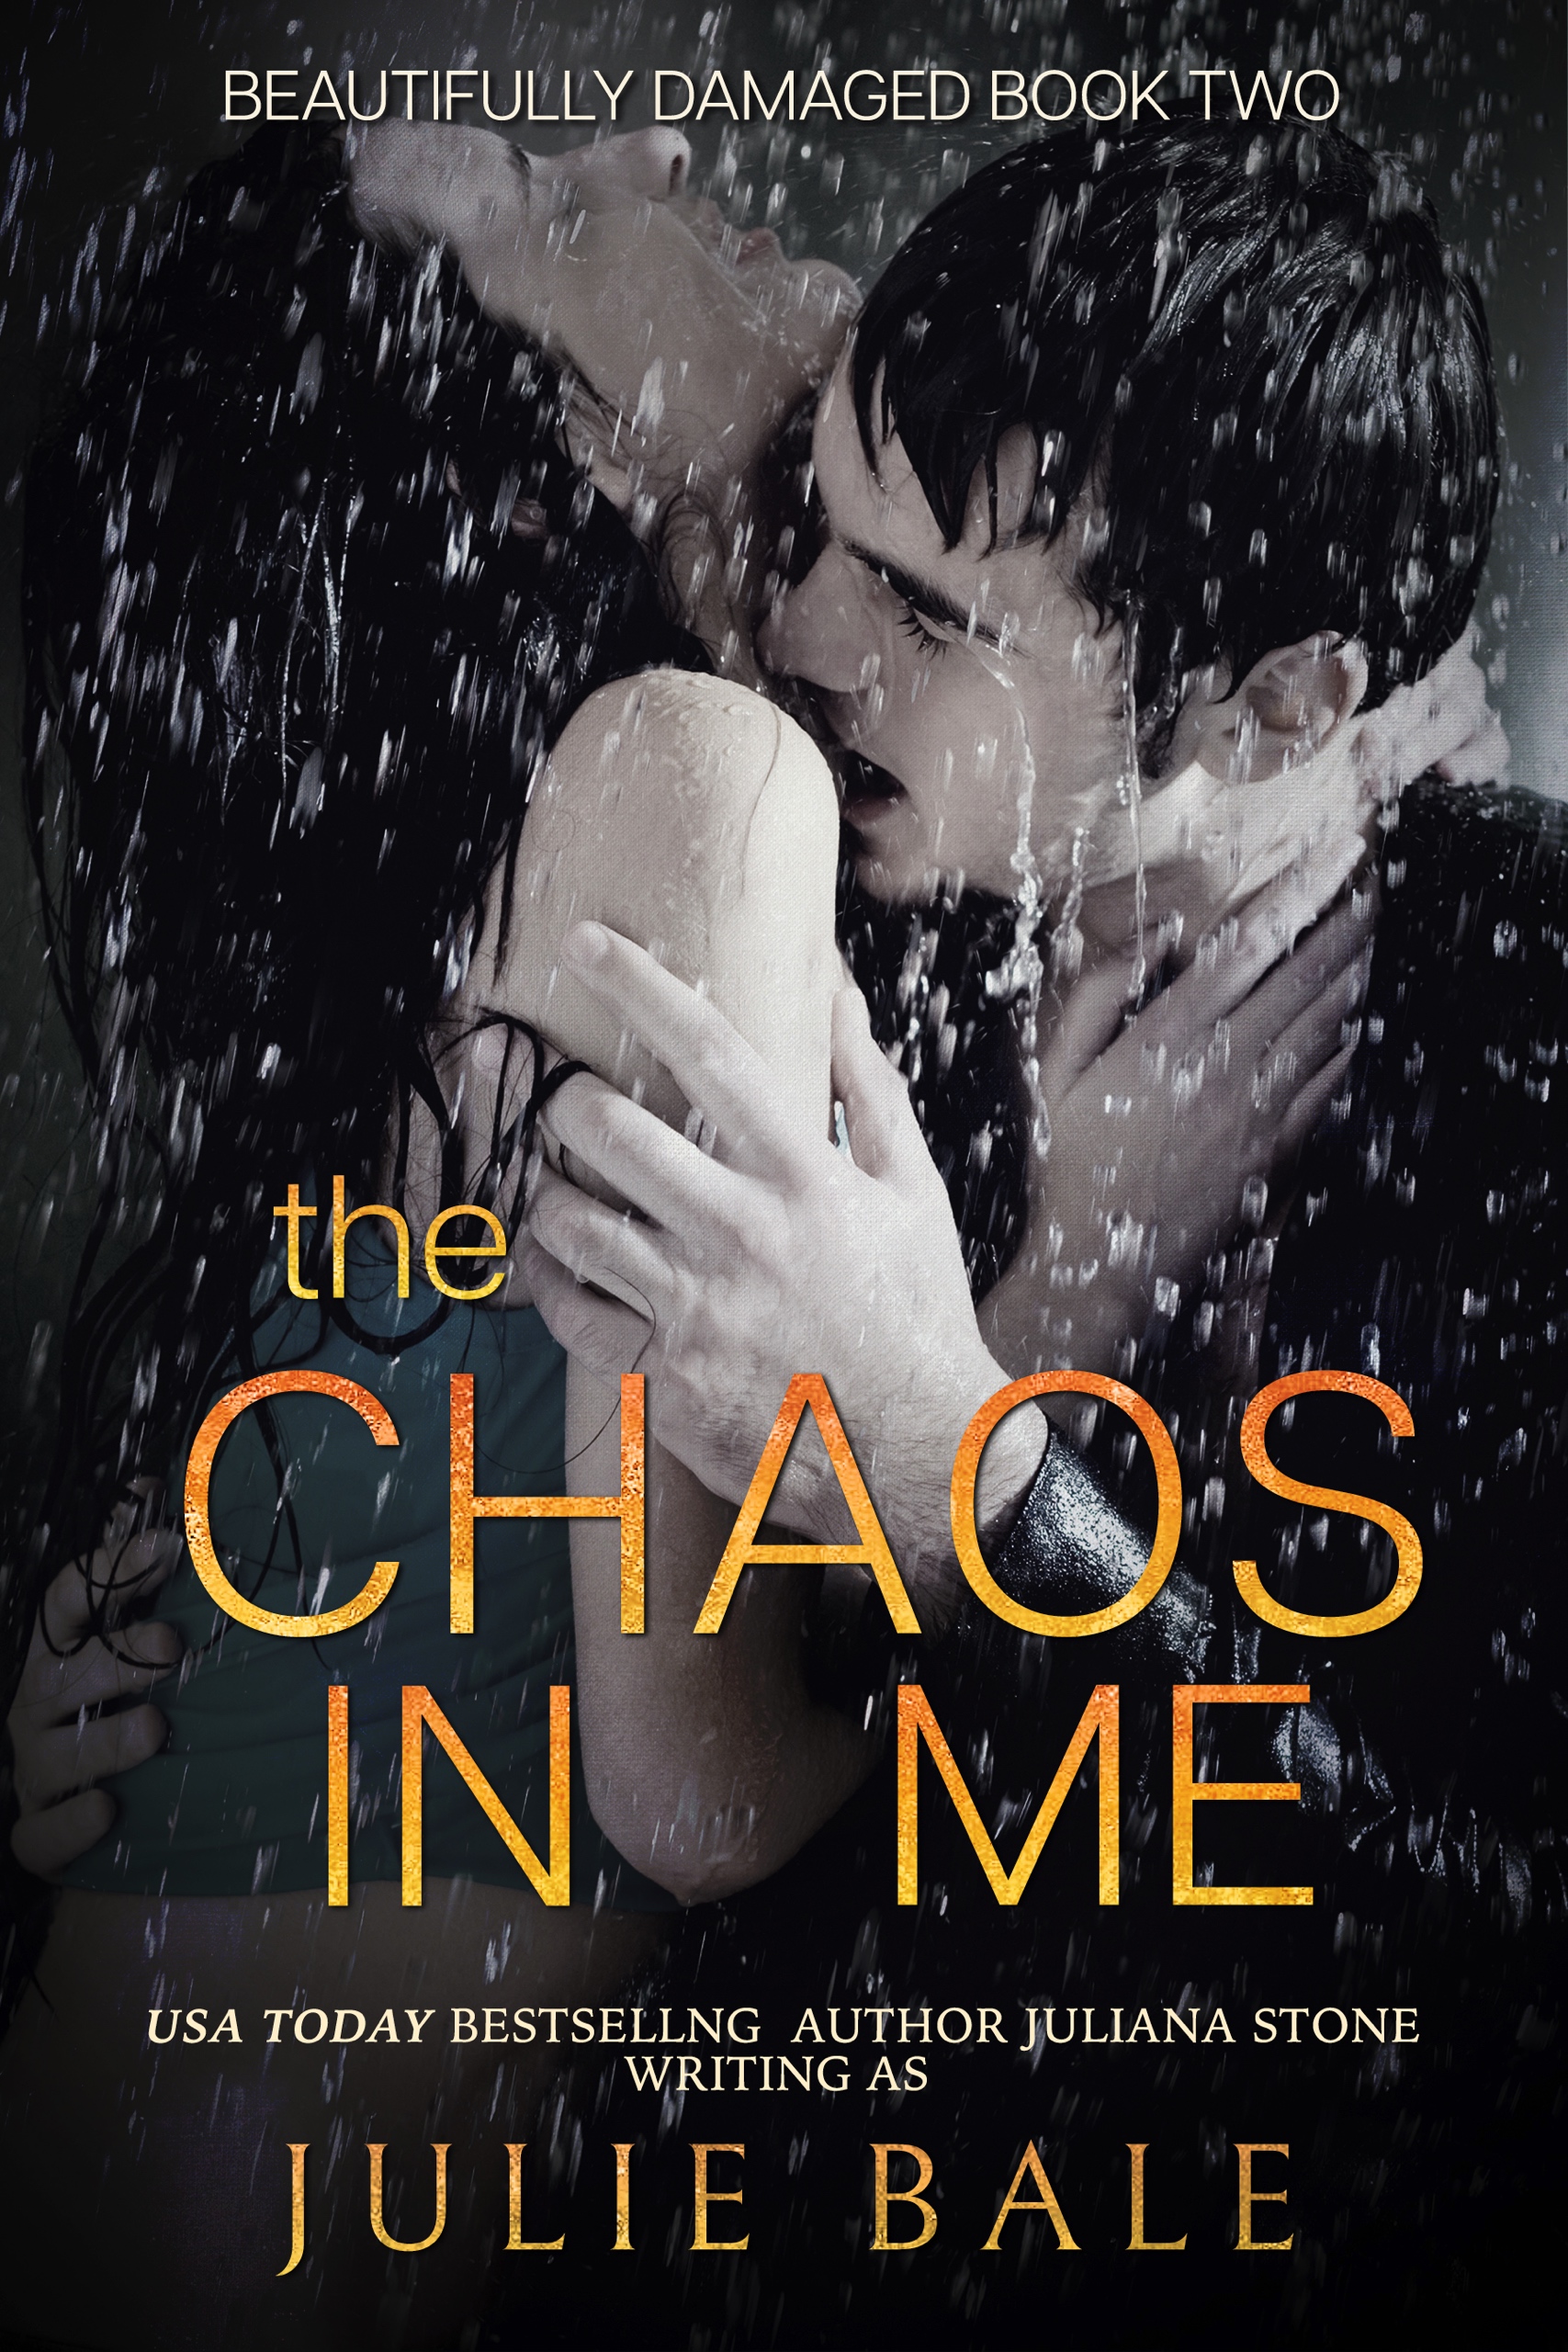 The Chaos In Me by Juliana Stone